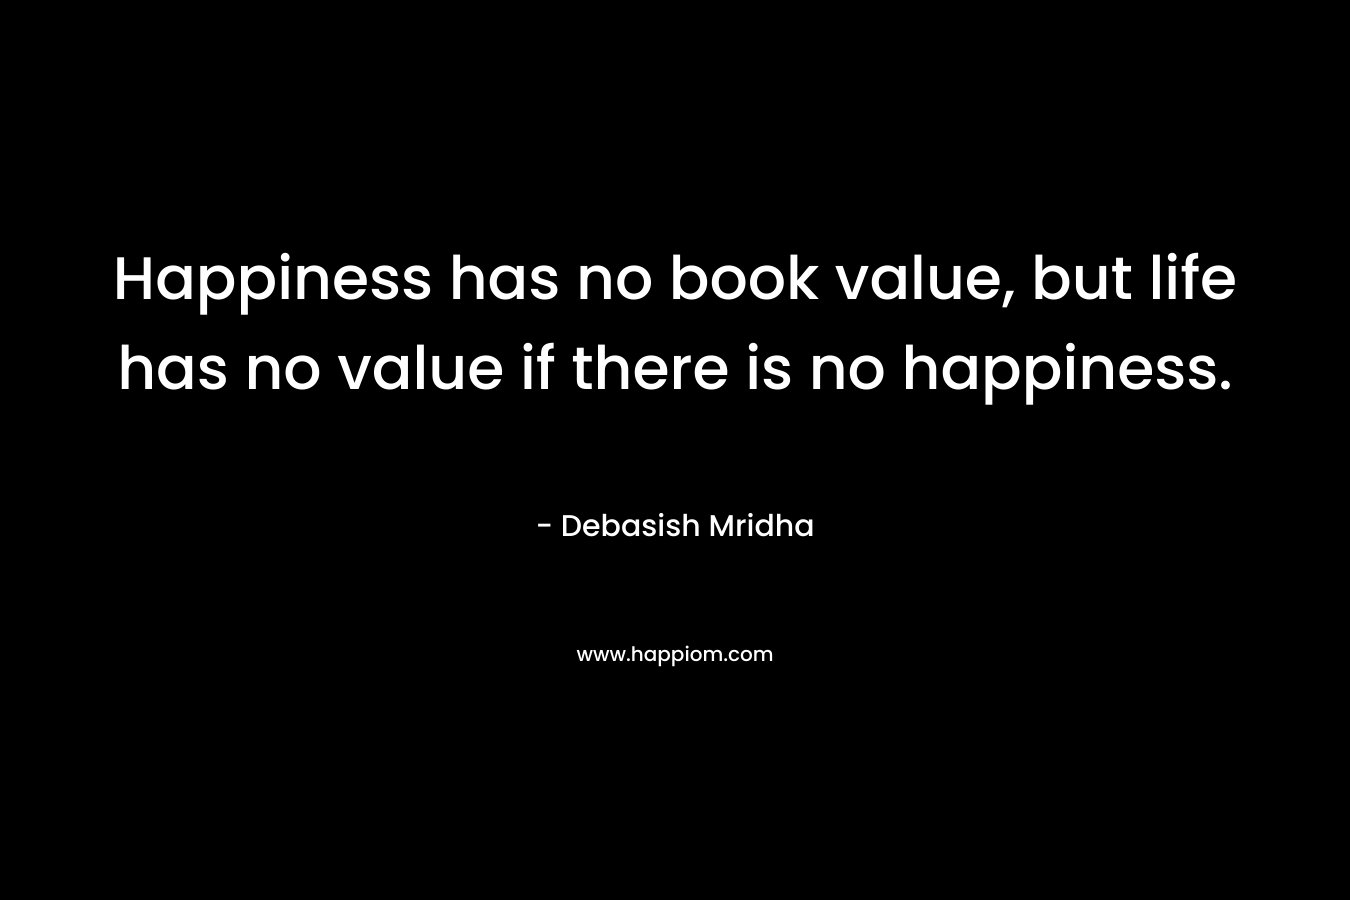 Happiness has no book value, but life has no value if there is no happiness.